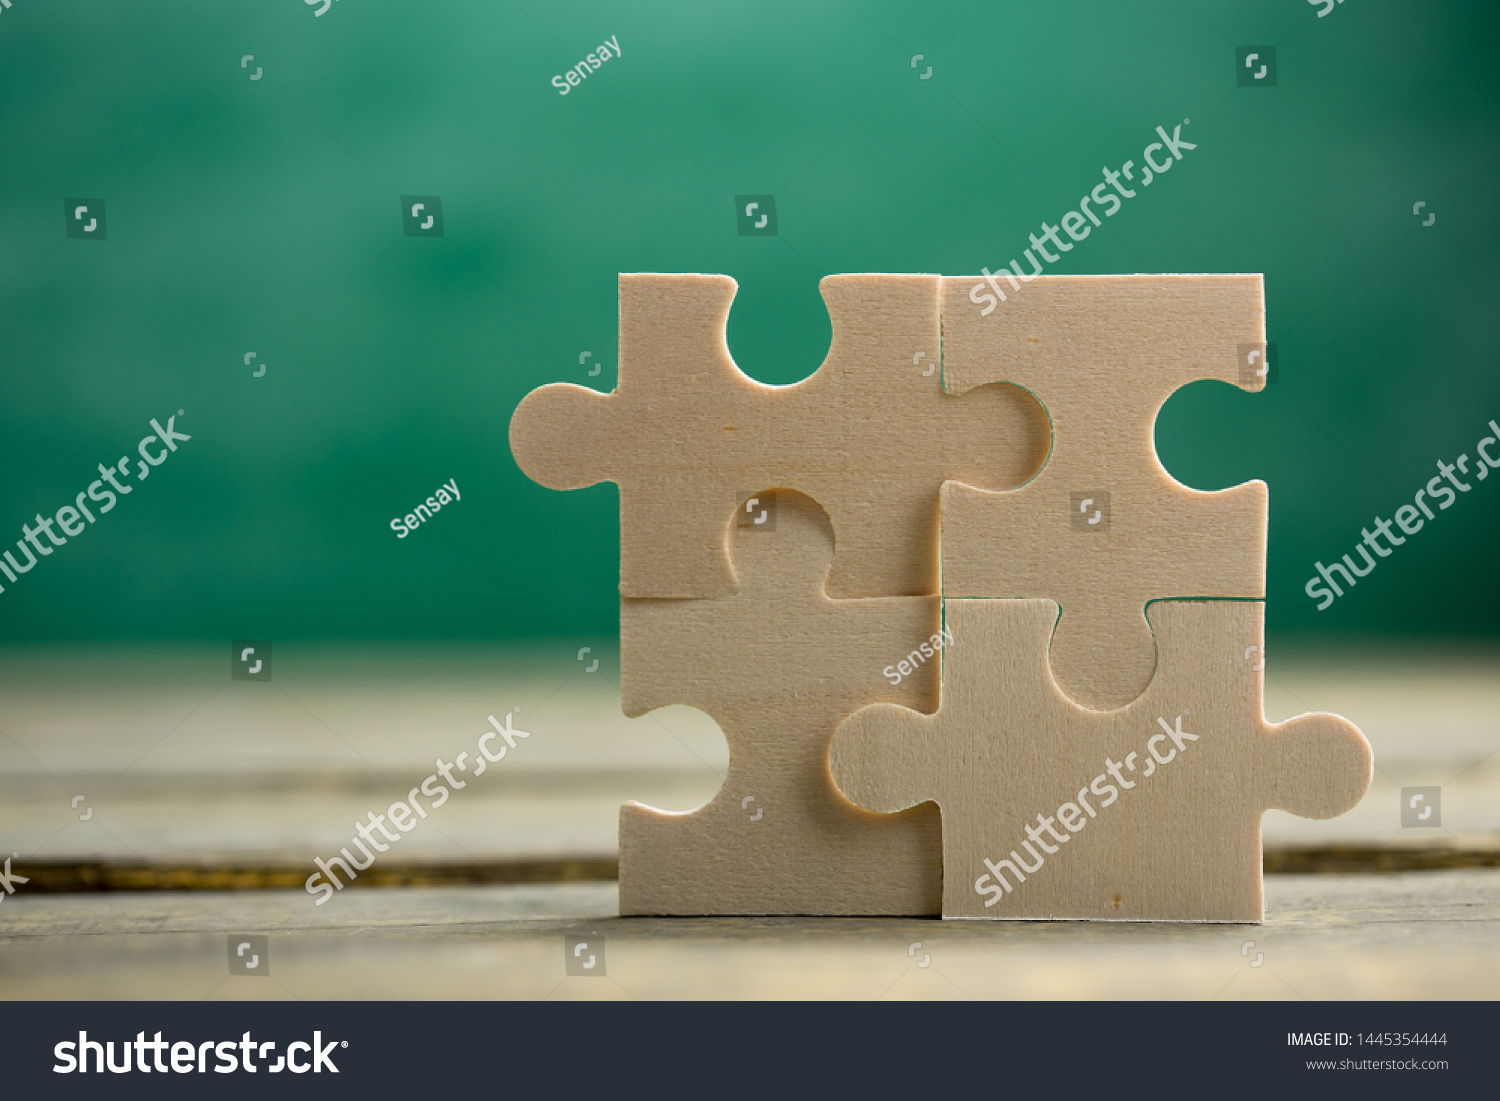 Creative solution for idea - business concept, jigsaw puzzle on the green blackboard background #1445354444